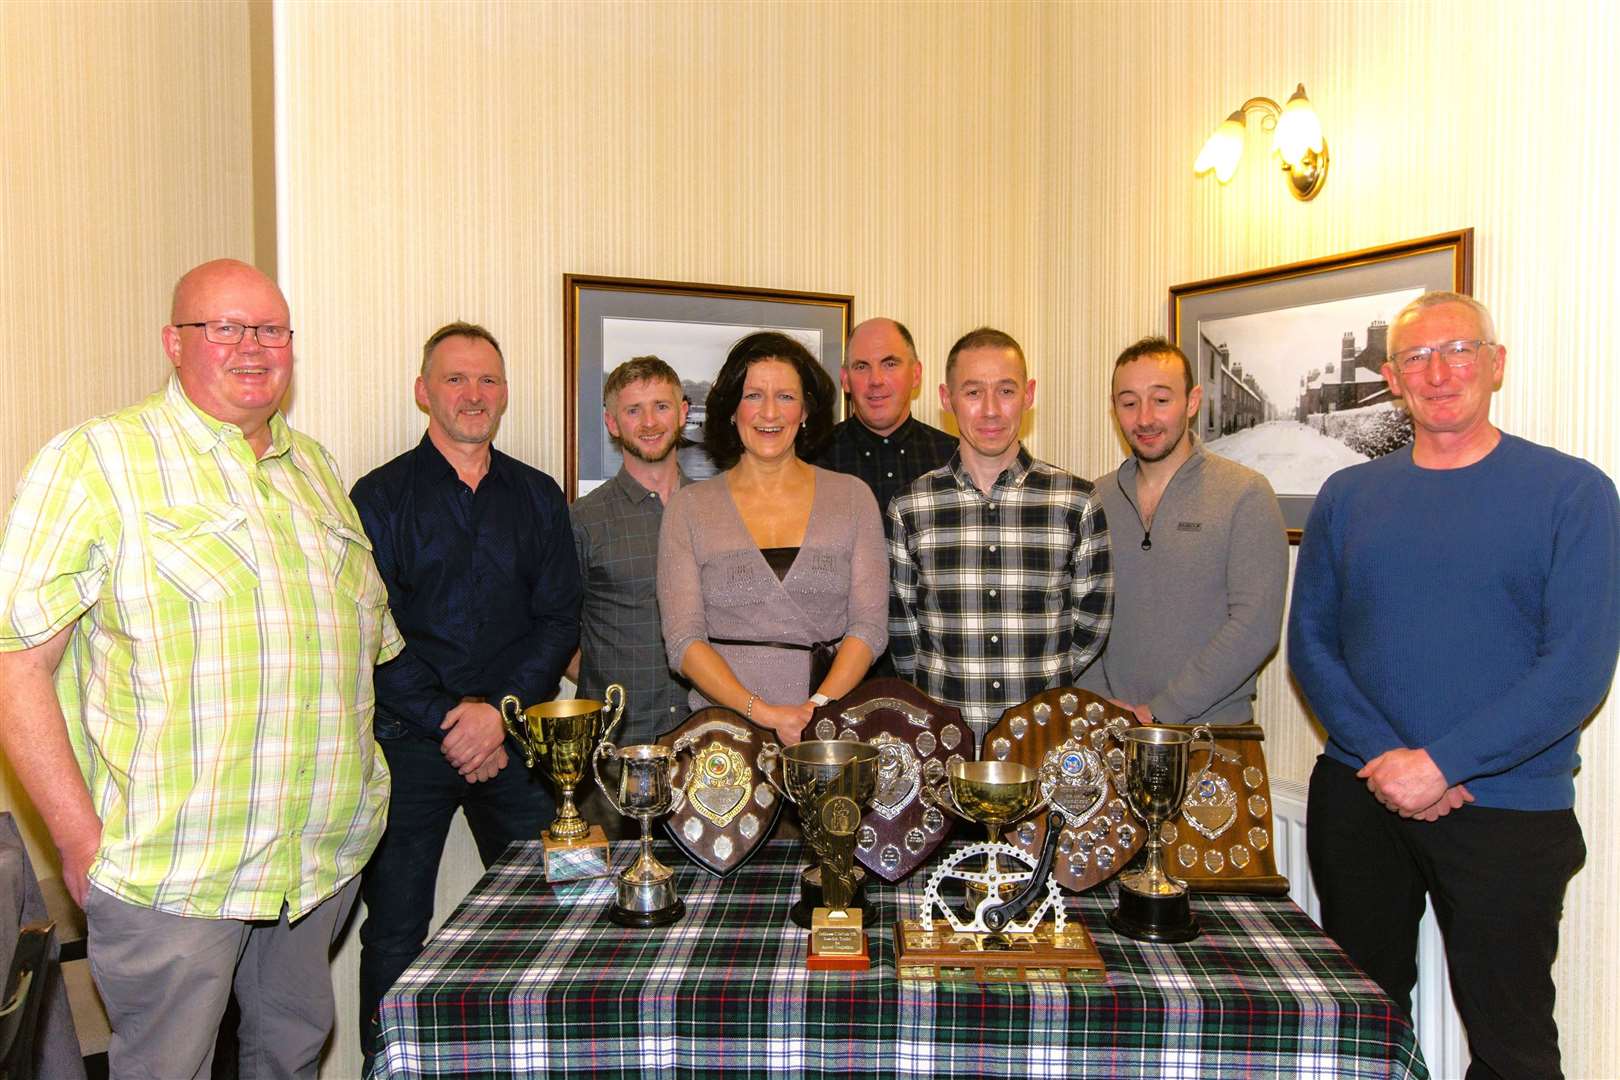 Wick Wheelers trophy winners pose for a photograph during the club's presentation dinner in the Nethercliffe Hotel, on Saturday night. Club champion was Stuart Anderson, (centre right), while Lisa Coghill won the ladies championship. Photo: Robert MacDonald/Northern Studios